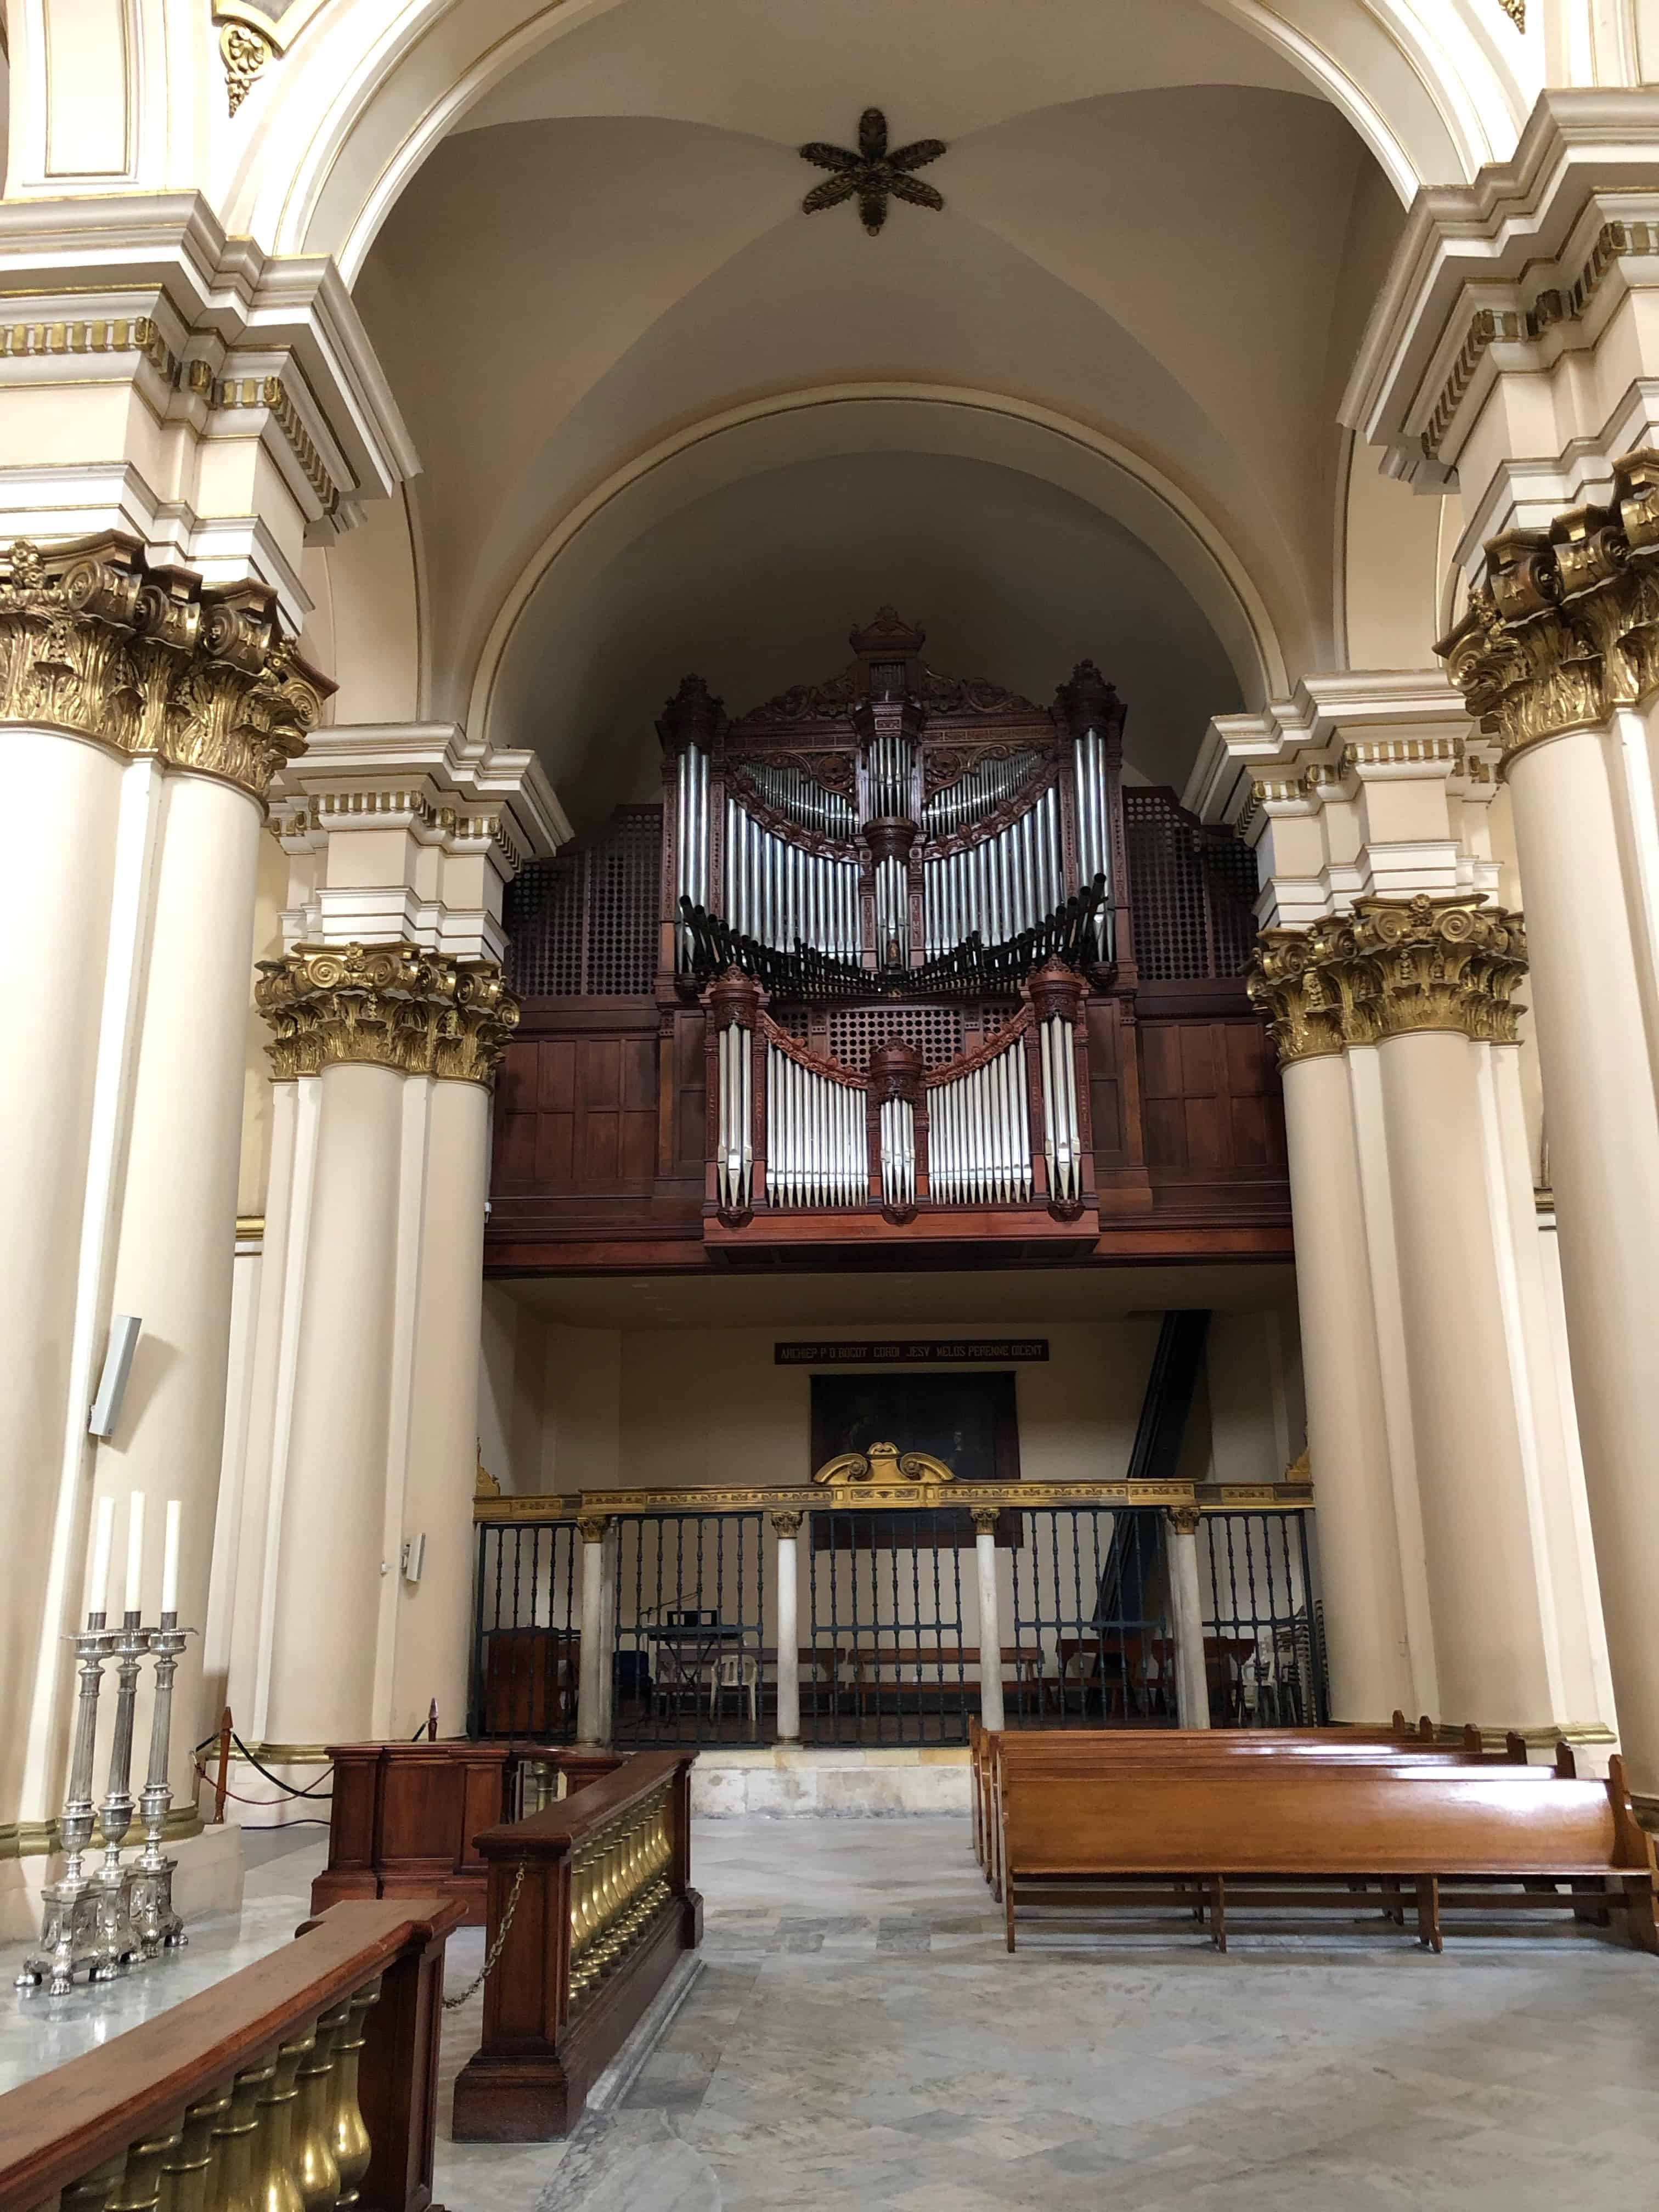 Organ in the Cathedral of Bogotá